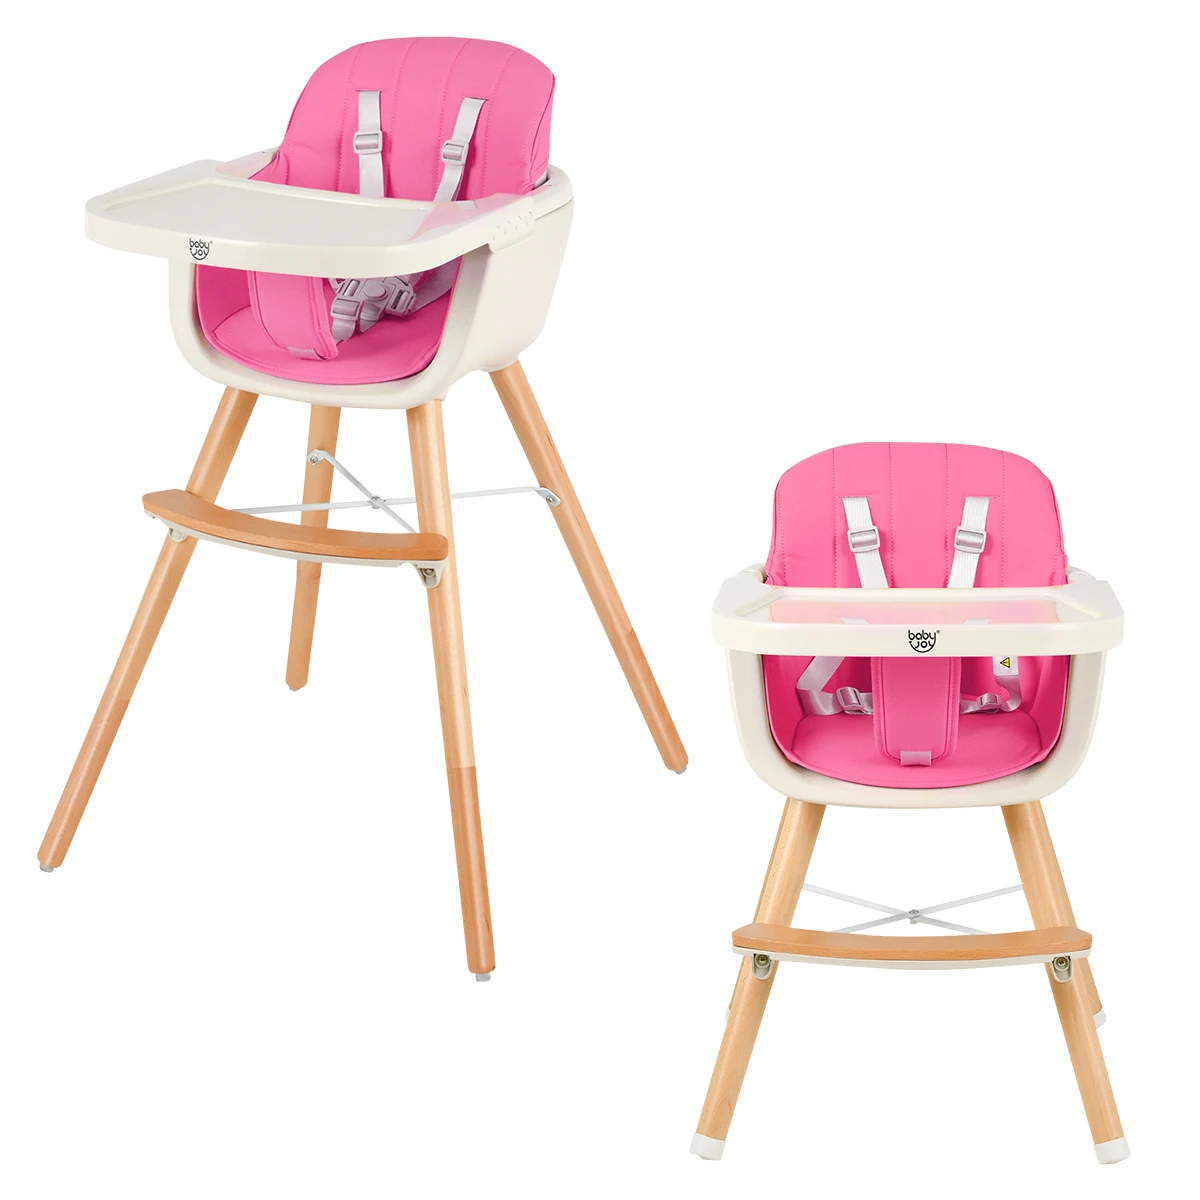 3 in 1 Convertible Wooden High Chair Baby Toddler Highchair w/ Cushion Pink